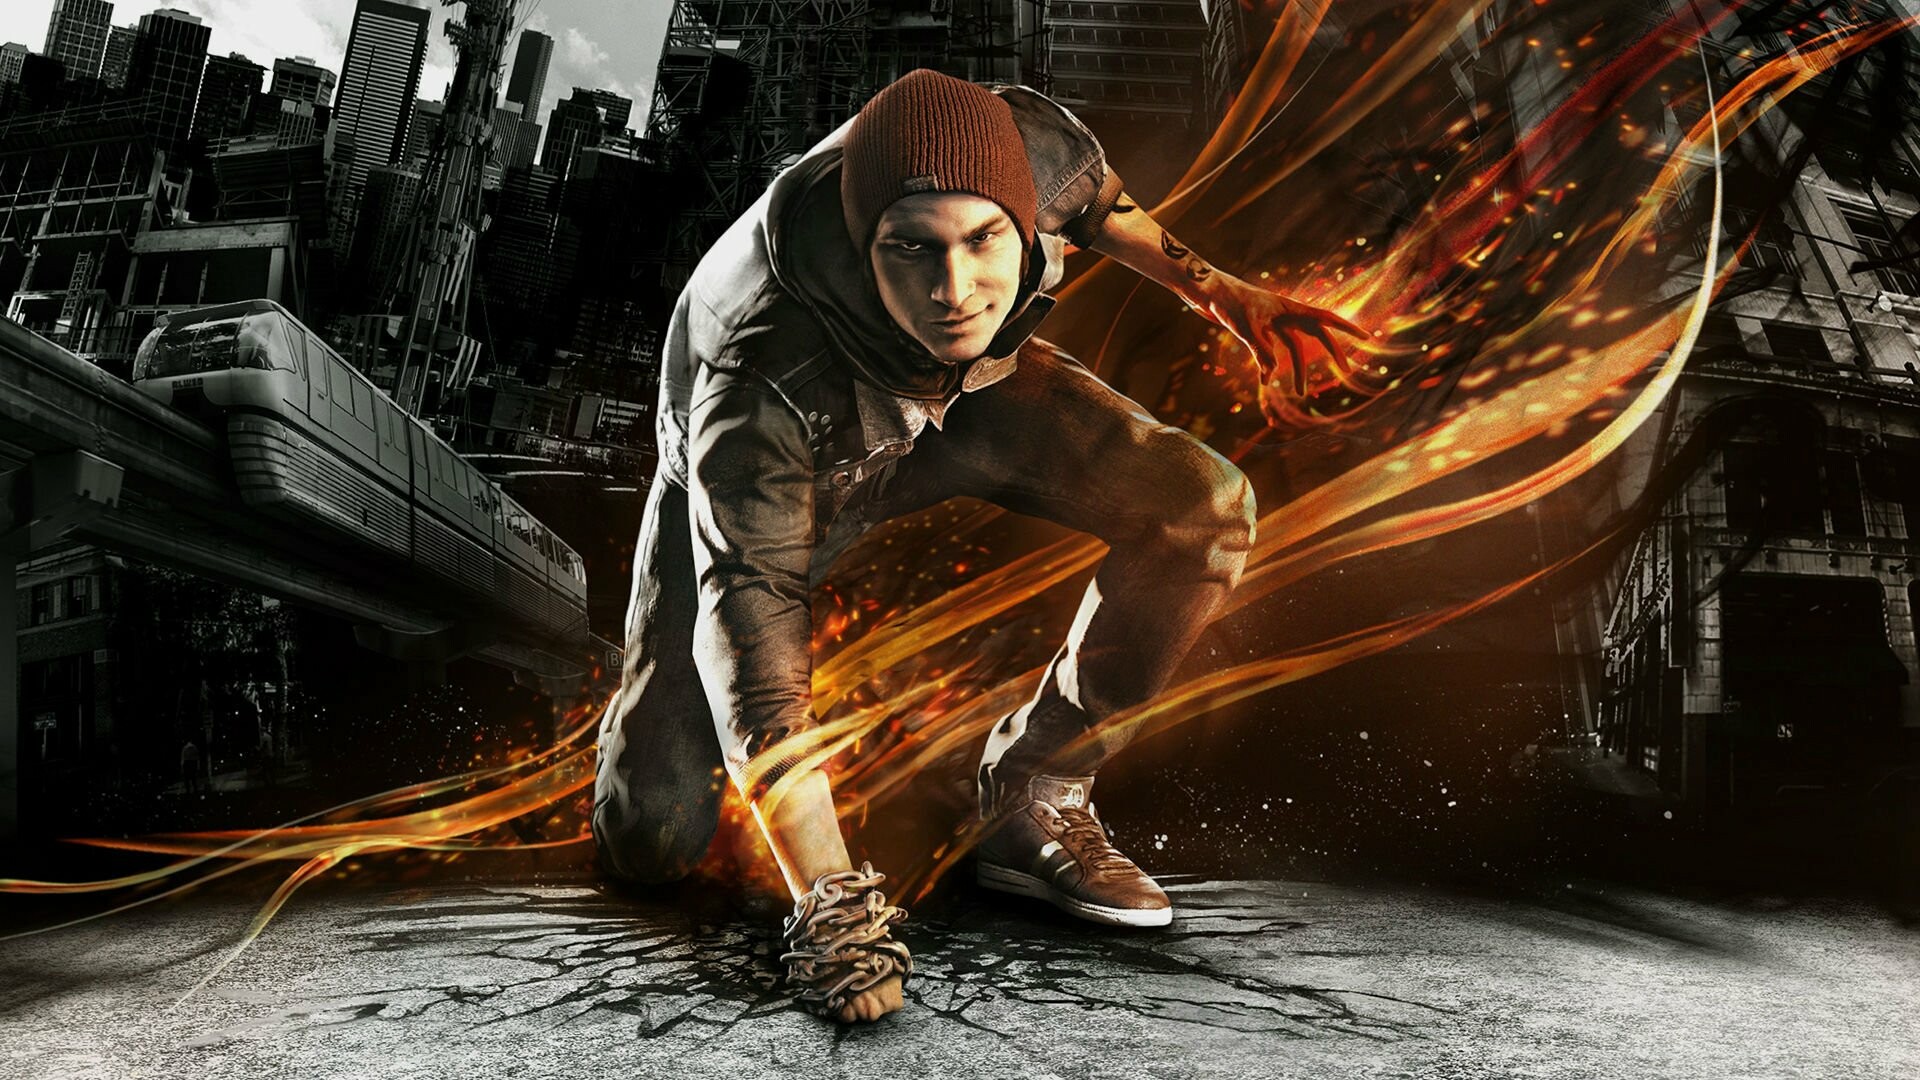 inFAMOUS: The story follows protagonist Delsin Rowe fighting the Department of Unified Protection (D.U.P.) in a fictionalized Seattle. 1920x1080 Full HD Wallpaper.